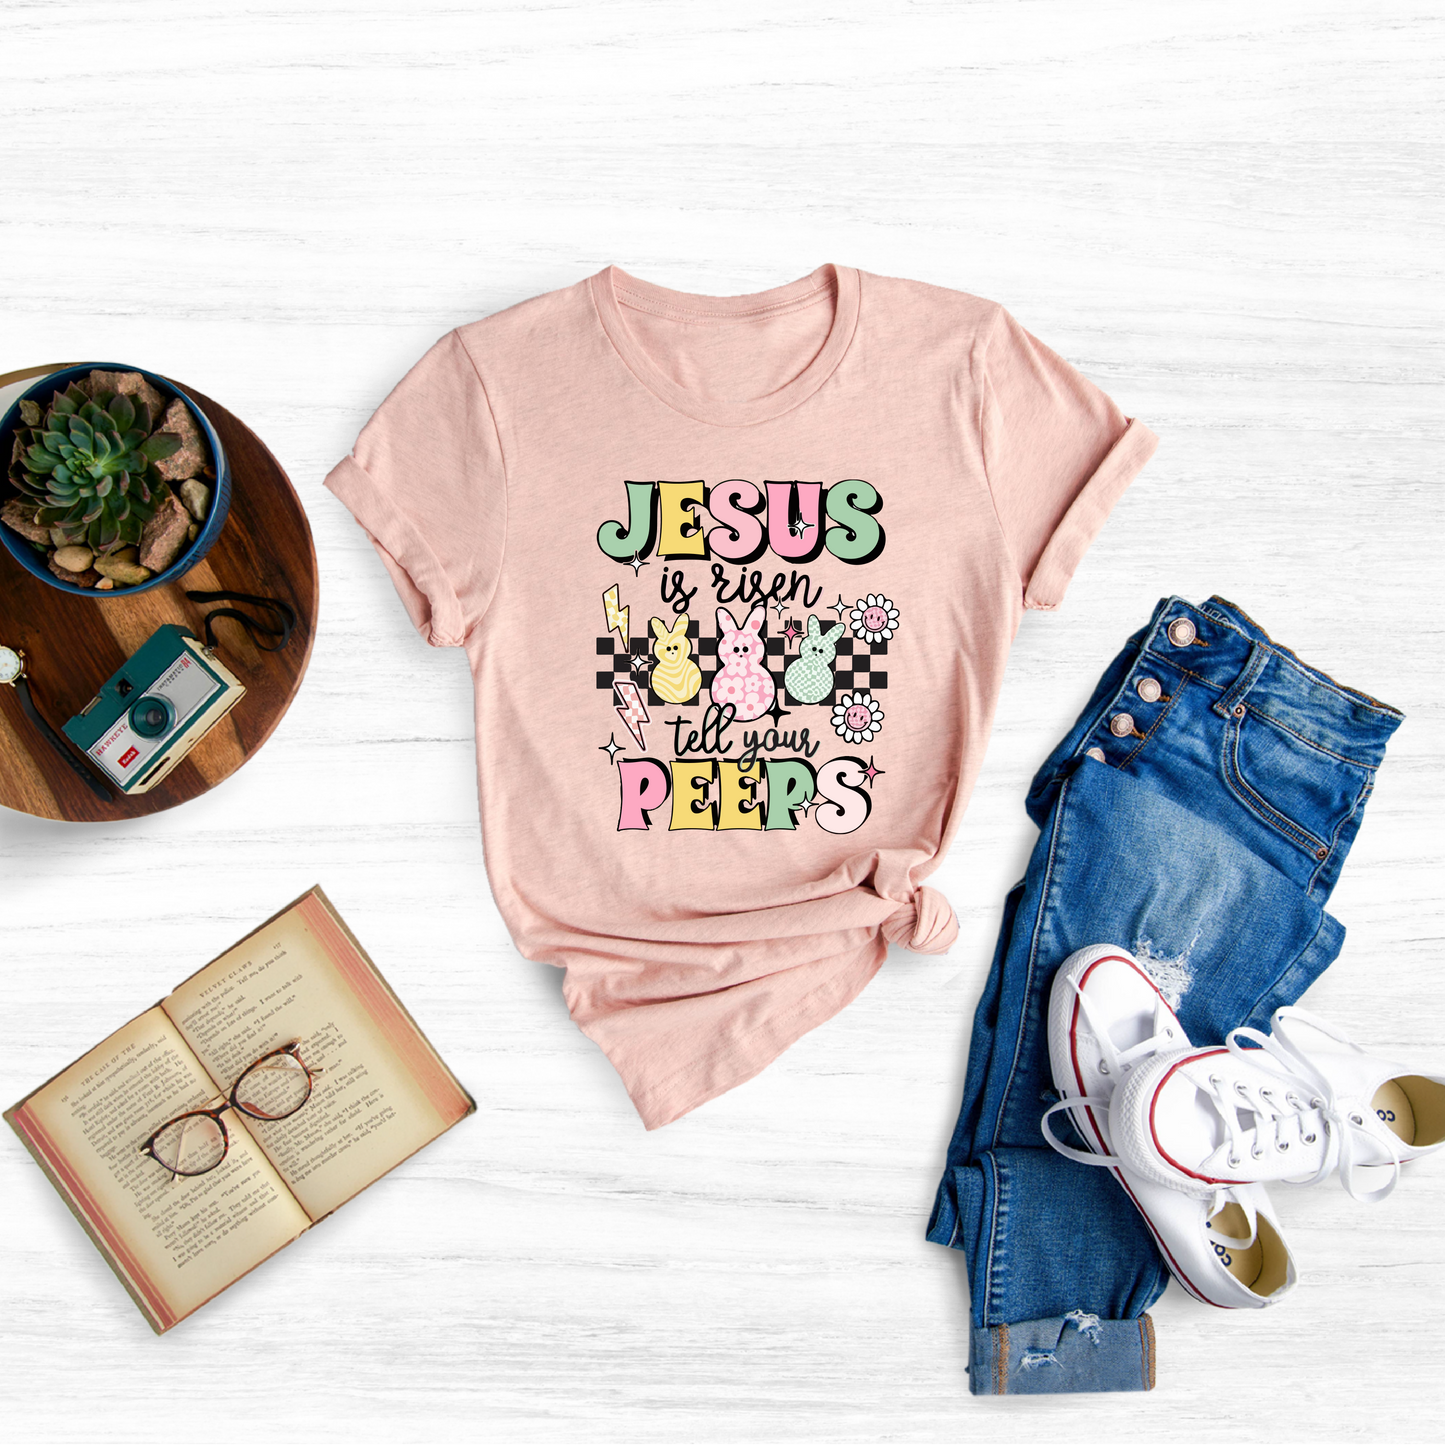 Celebrate the joyous Easter holiday with this adorable "Jesus is Risen Tell Your Peeps" toddler shirt.